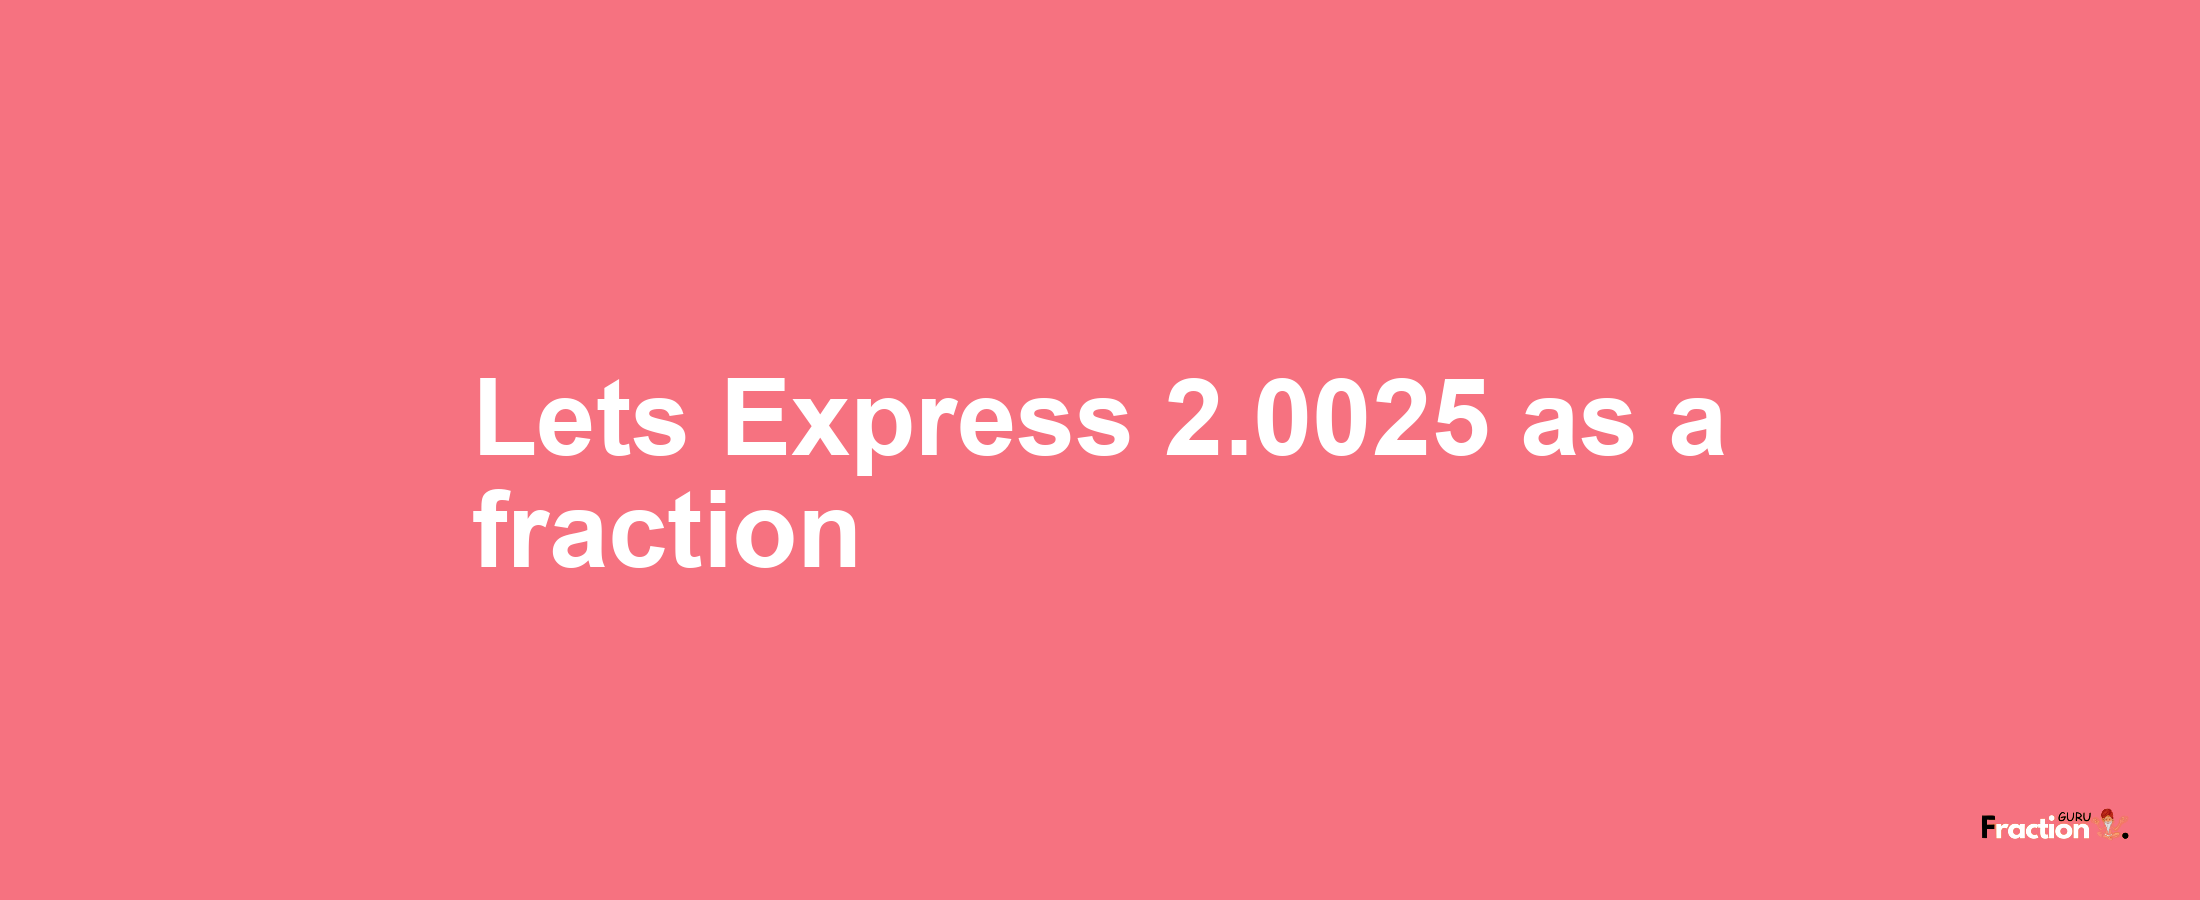 Lets Express 2.0025 as afraction